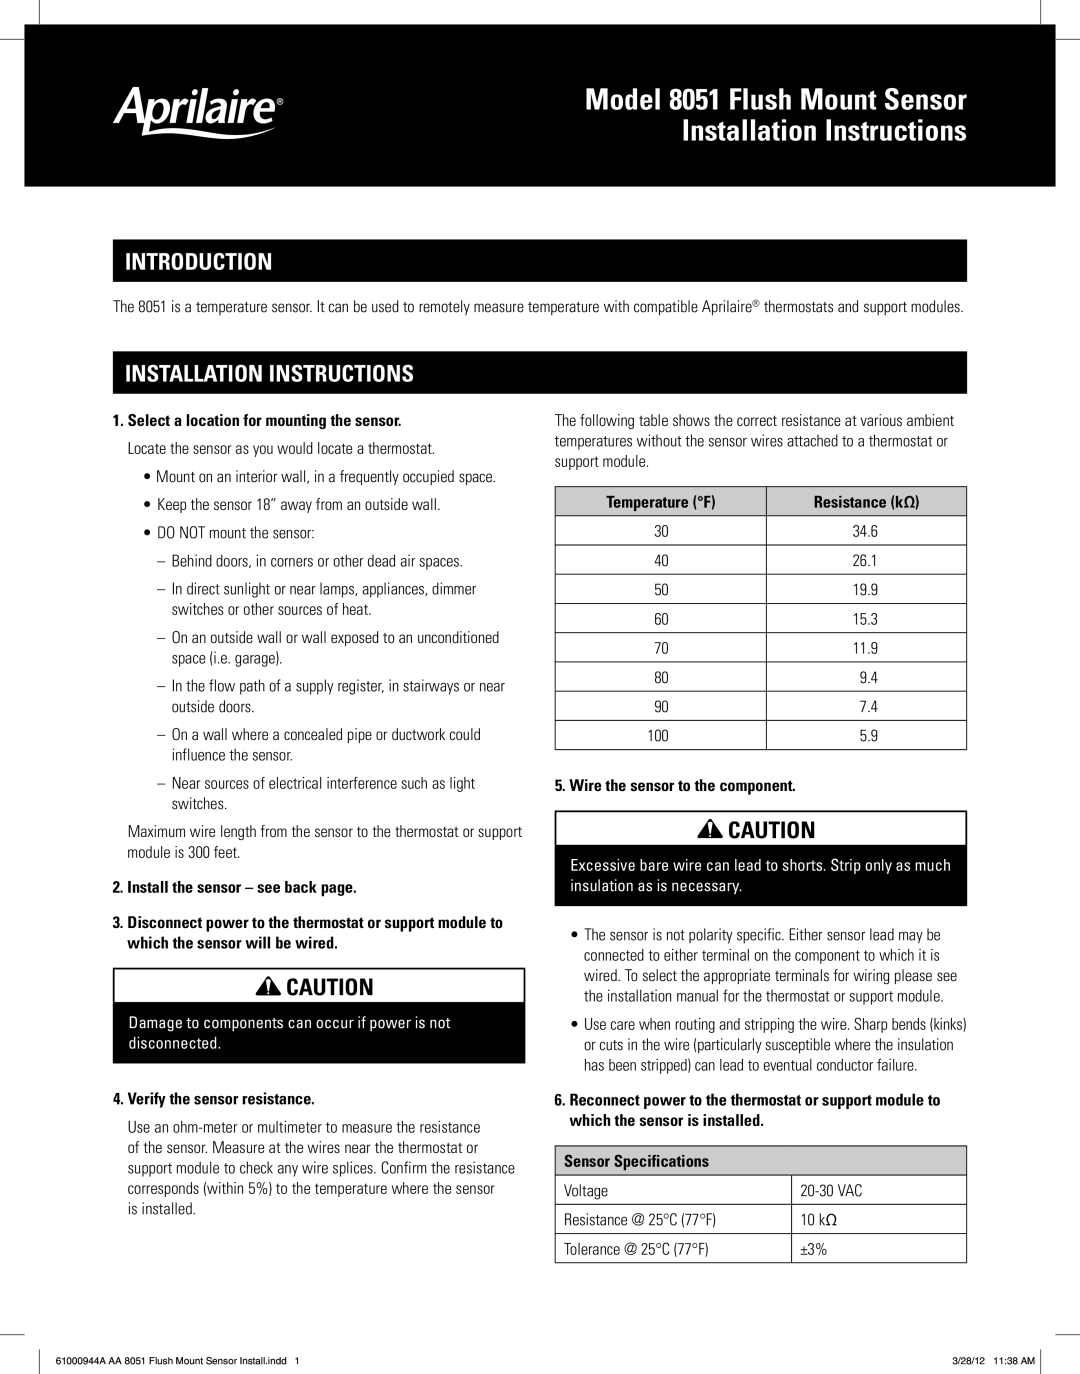 Aprilaire installation instructions Introduction, Installation Instructions, Model 8051 Flush Mount Sensor 